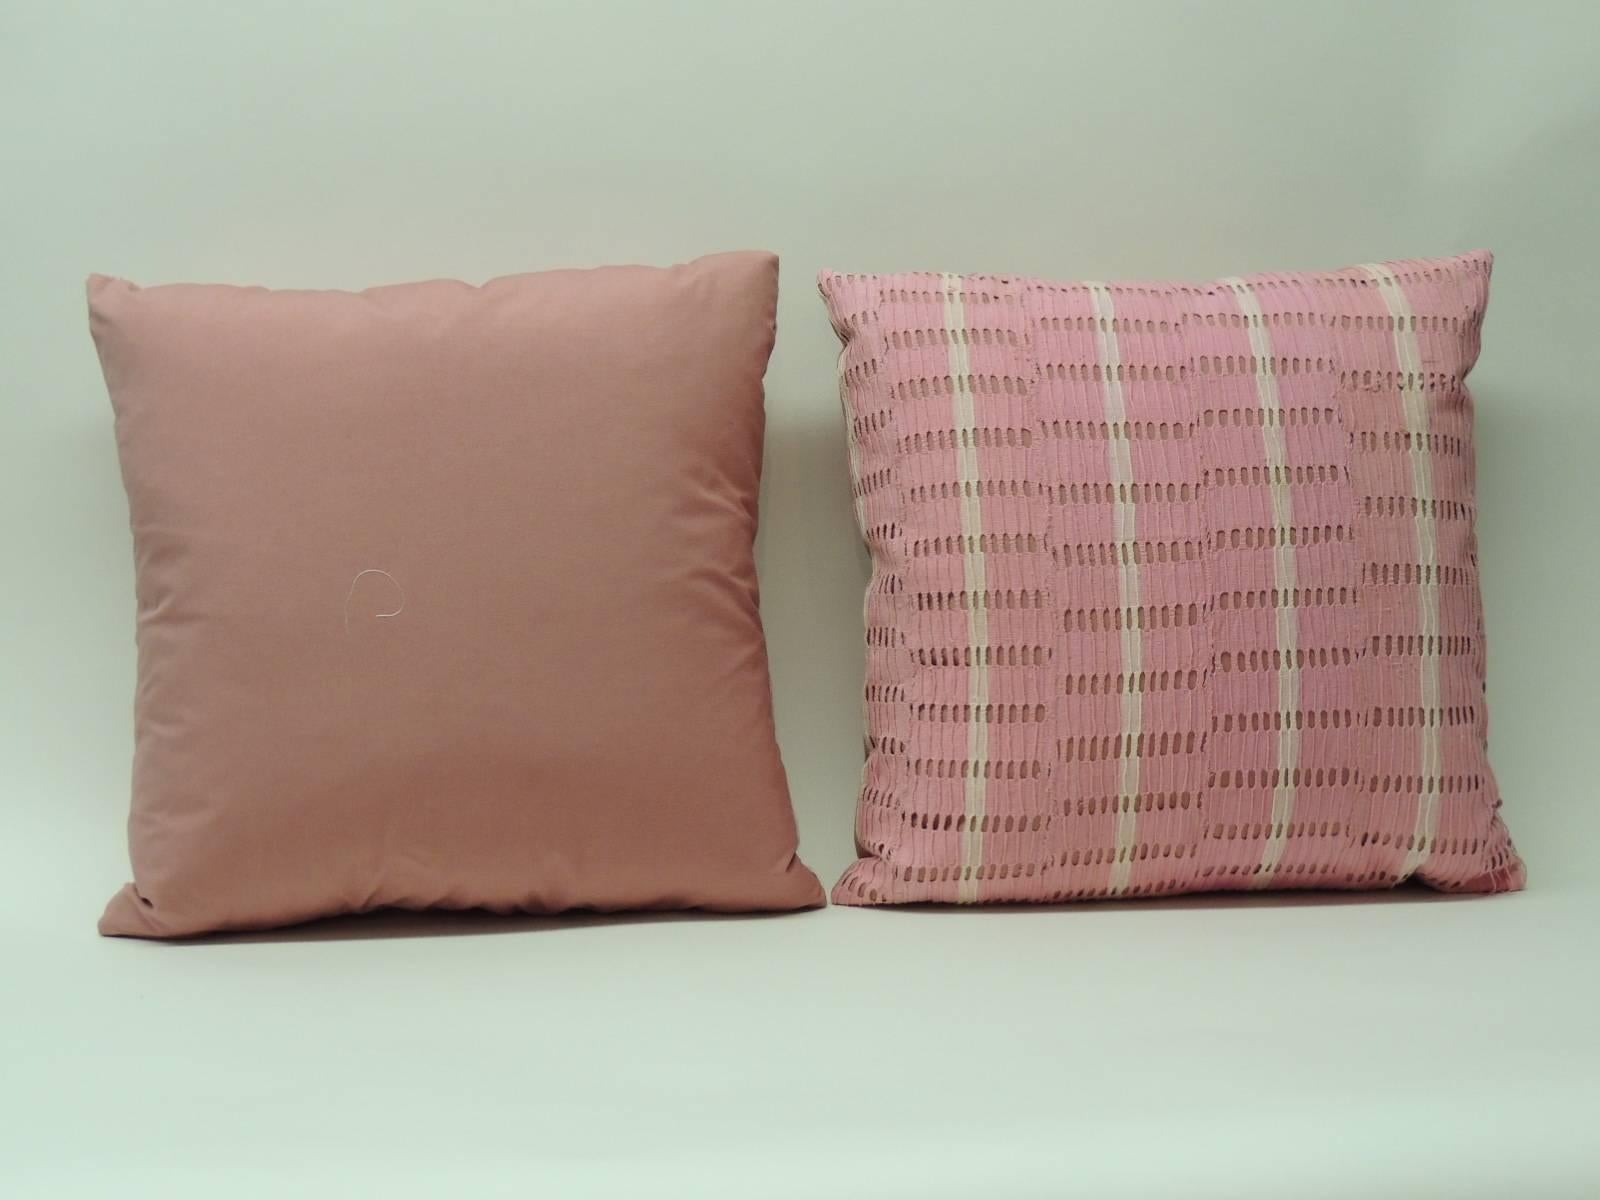 Antique Textiles Galleries:
Pair of pink vintage Yoruba African woven textile pillows. Eyelet design creates a stripe pattern. Hand-crafted and designed in the USA.  Hand stitched (no zipper.)  Custom made pillow inserts.  Pink cotton underlining